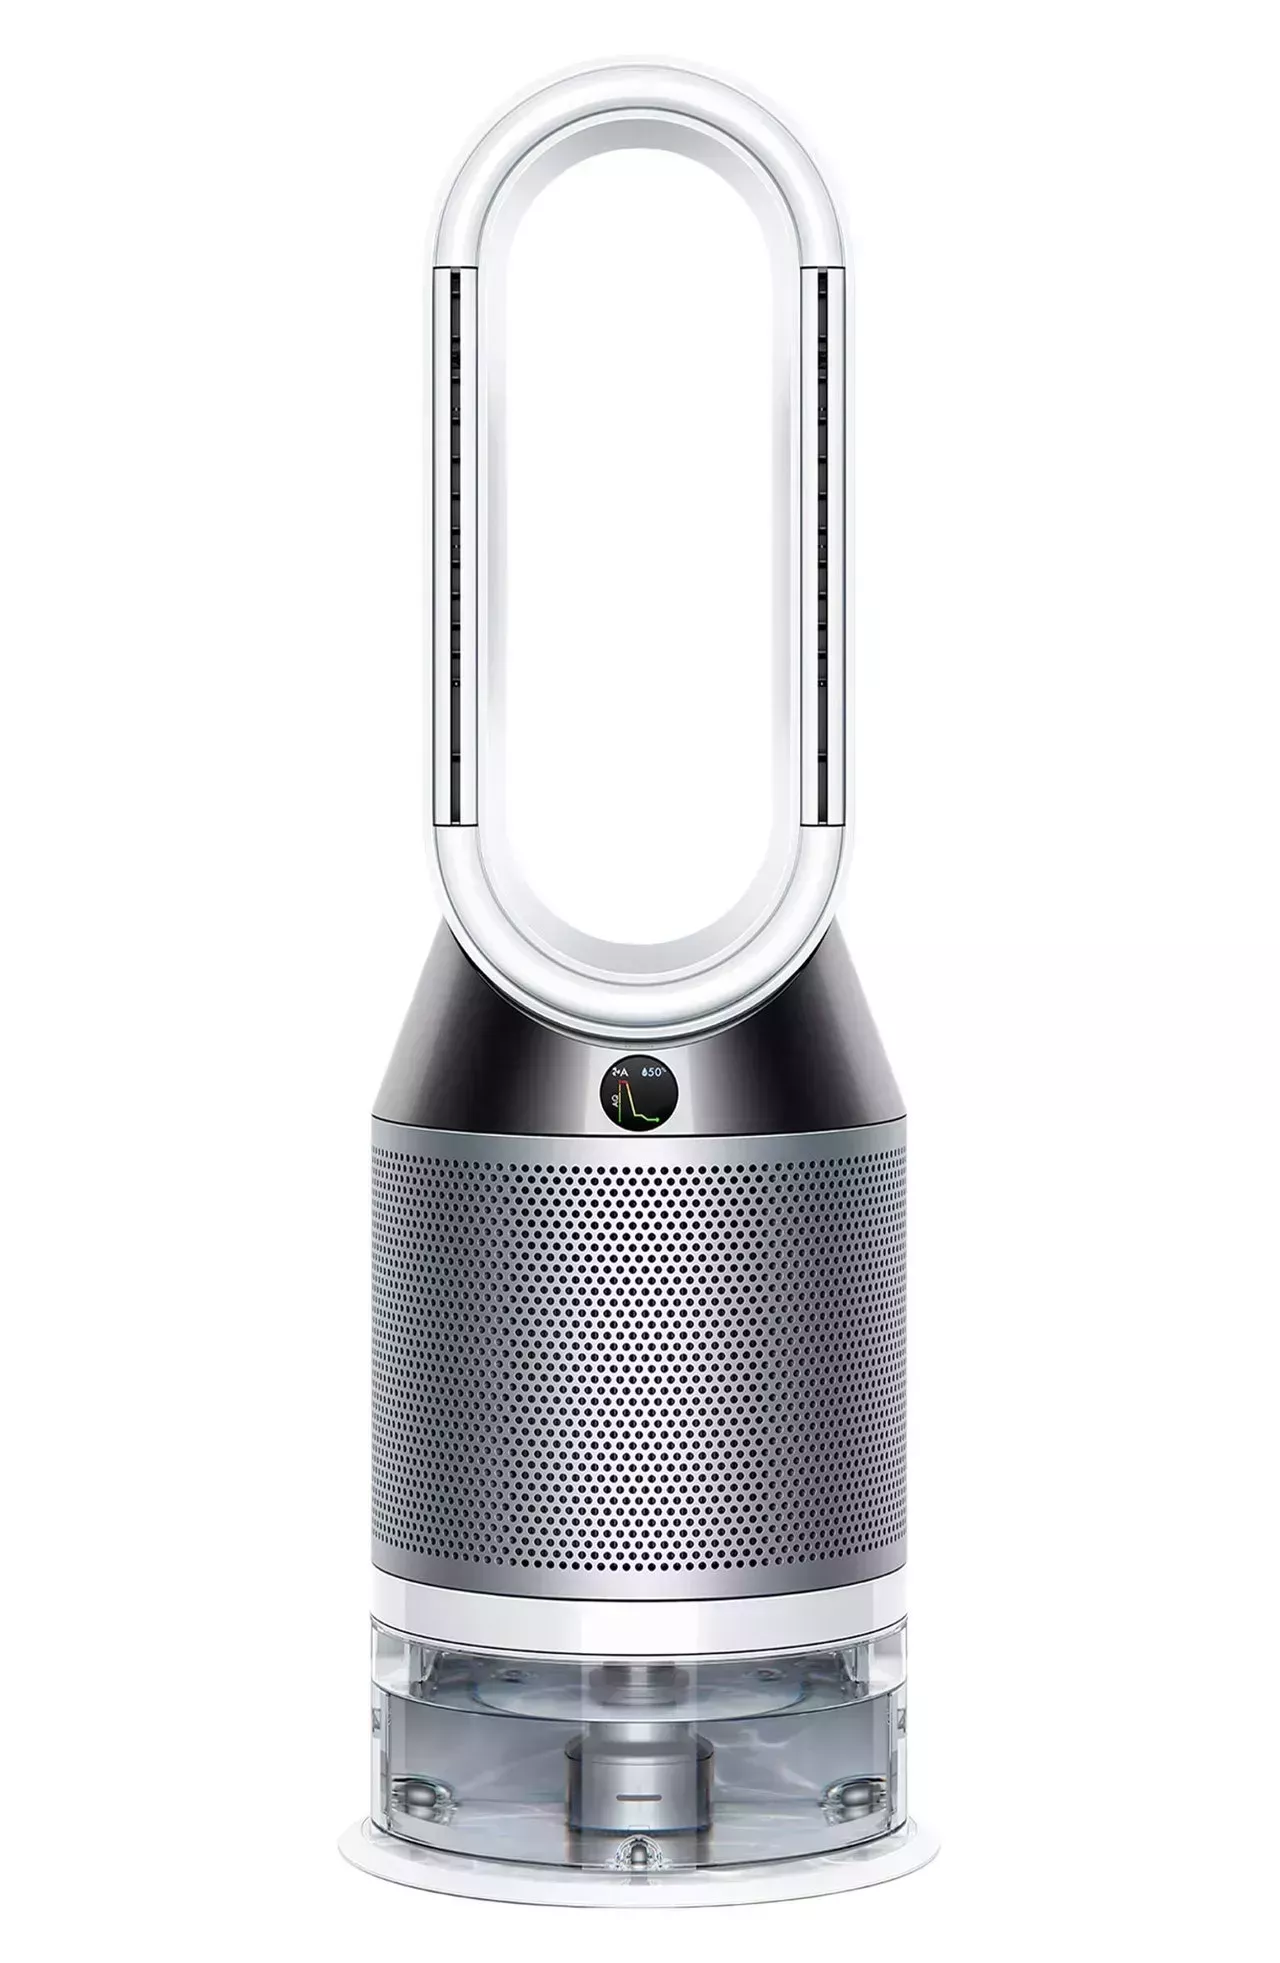 Dyson humidifier on white background 